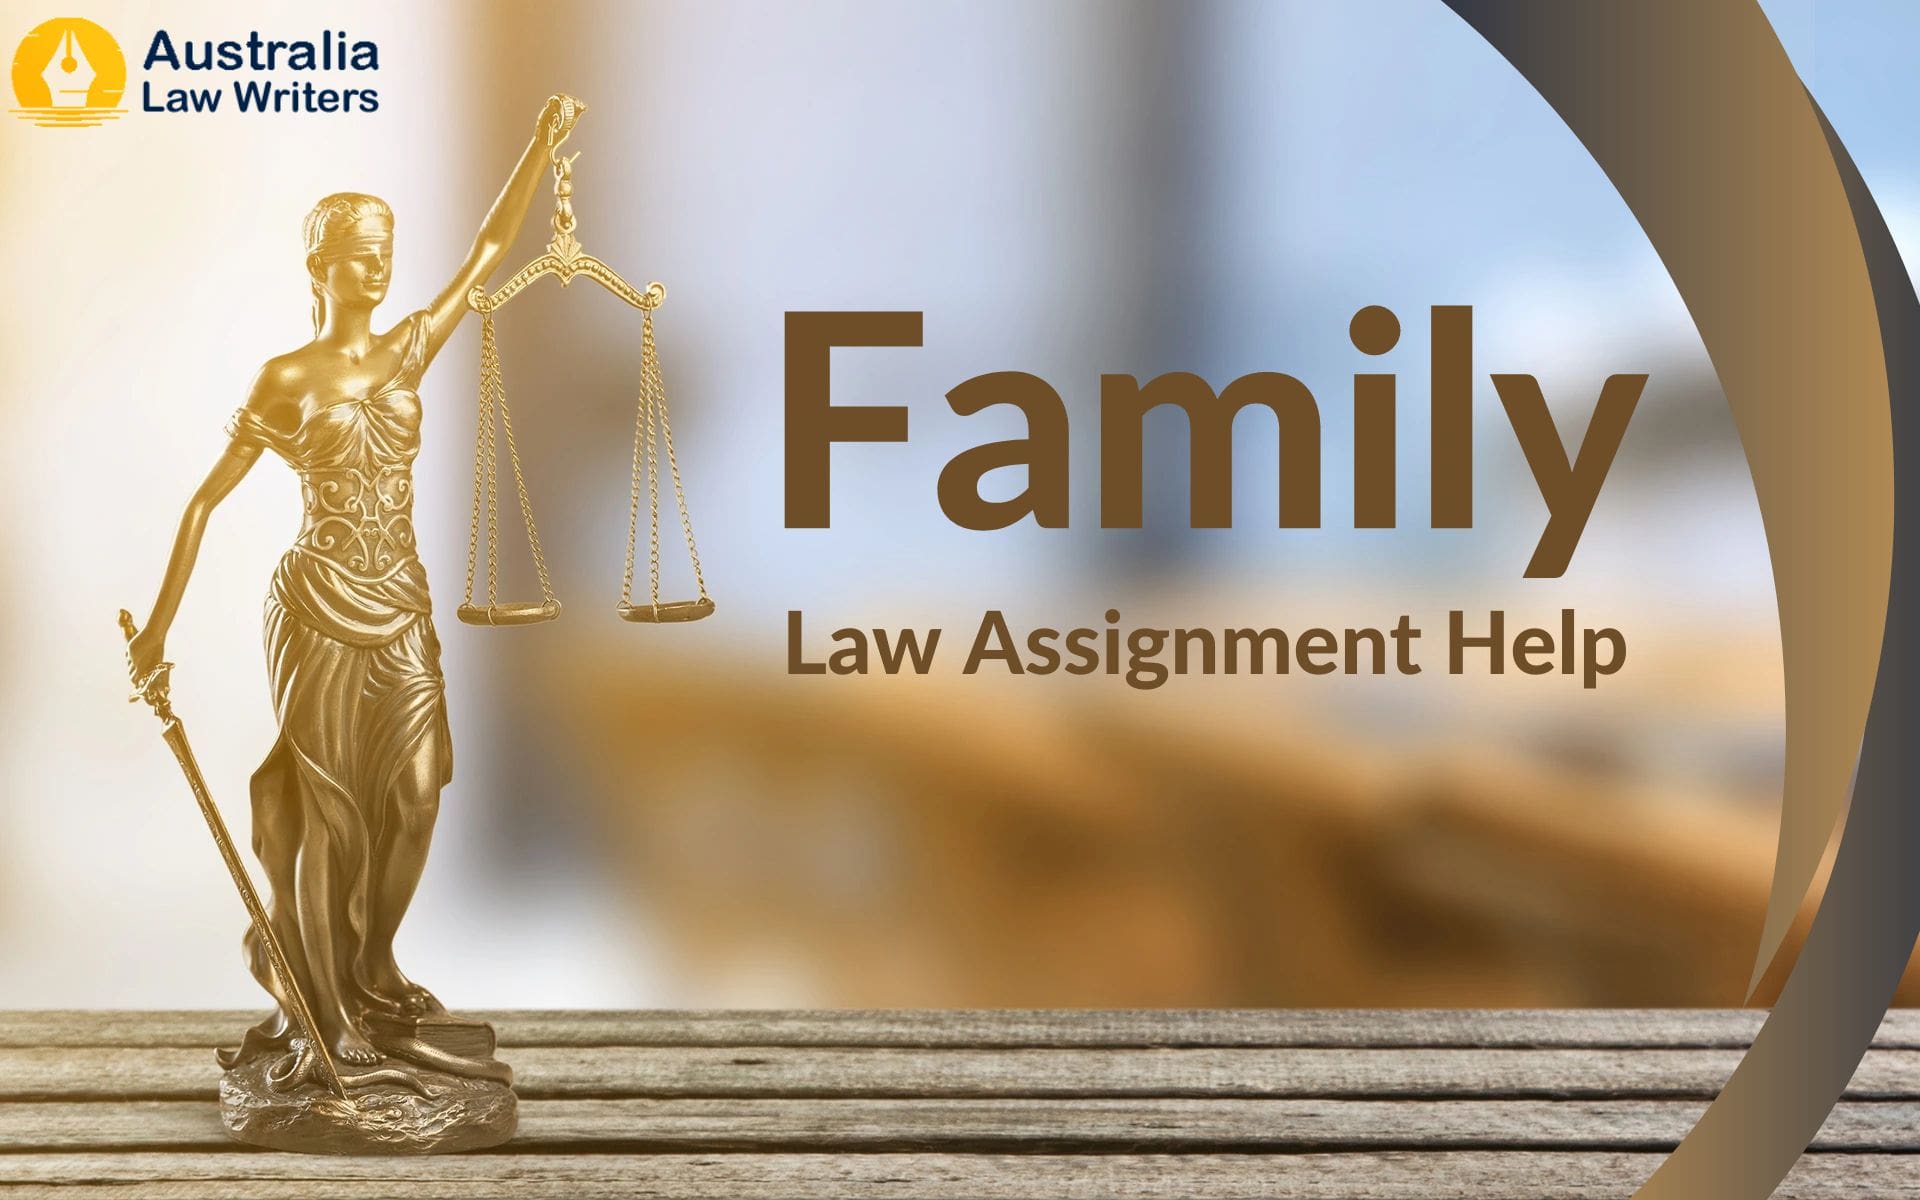 Reliable and trusted assignment services for Family Law in Australia